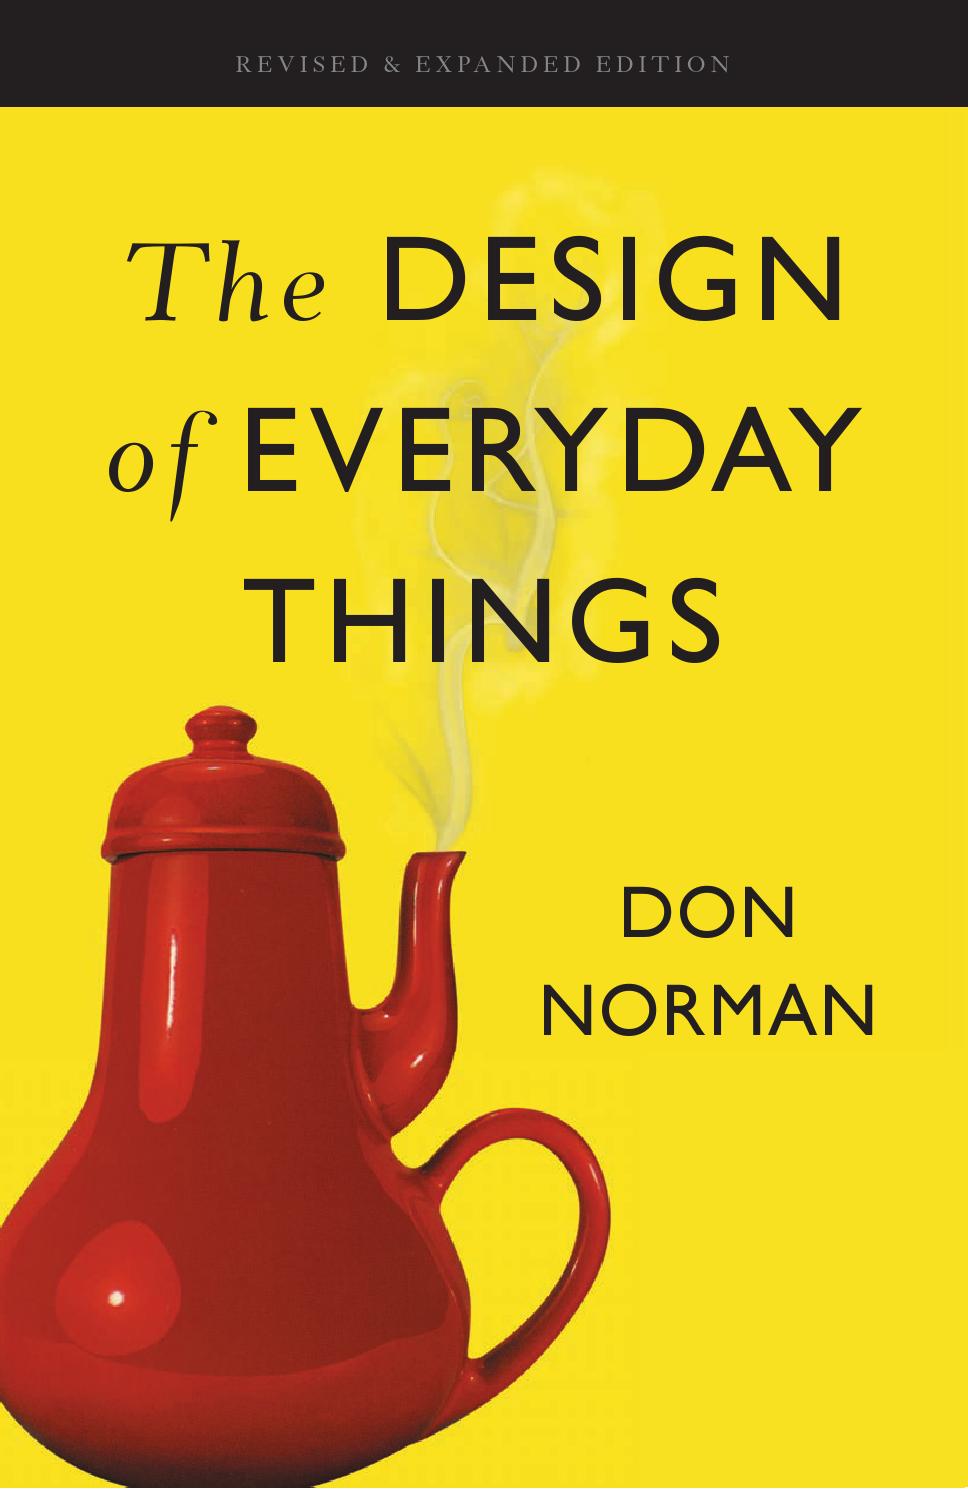 The cover of The Design of Everyday Things by Don Norman